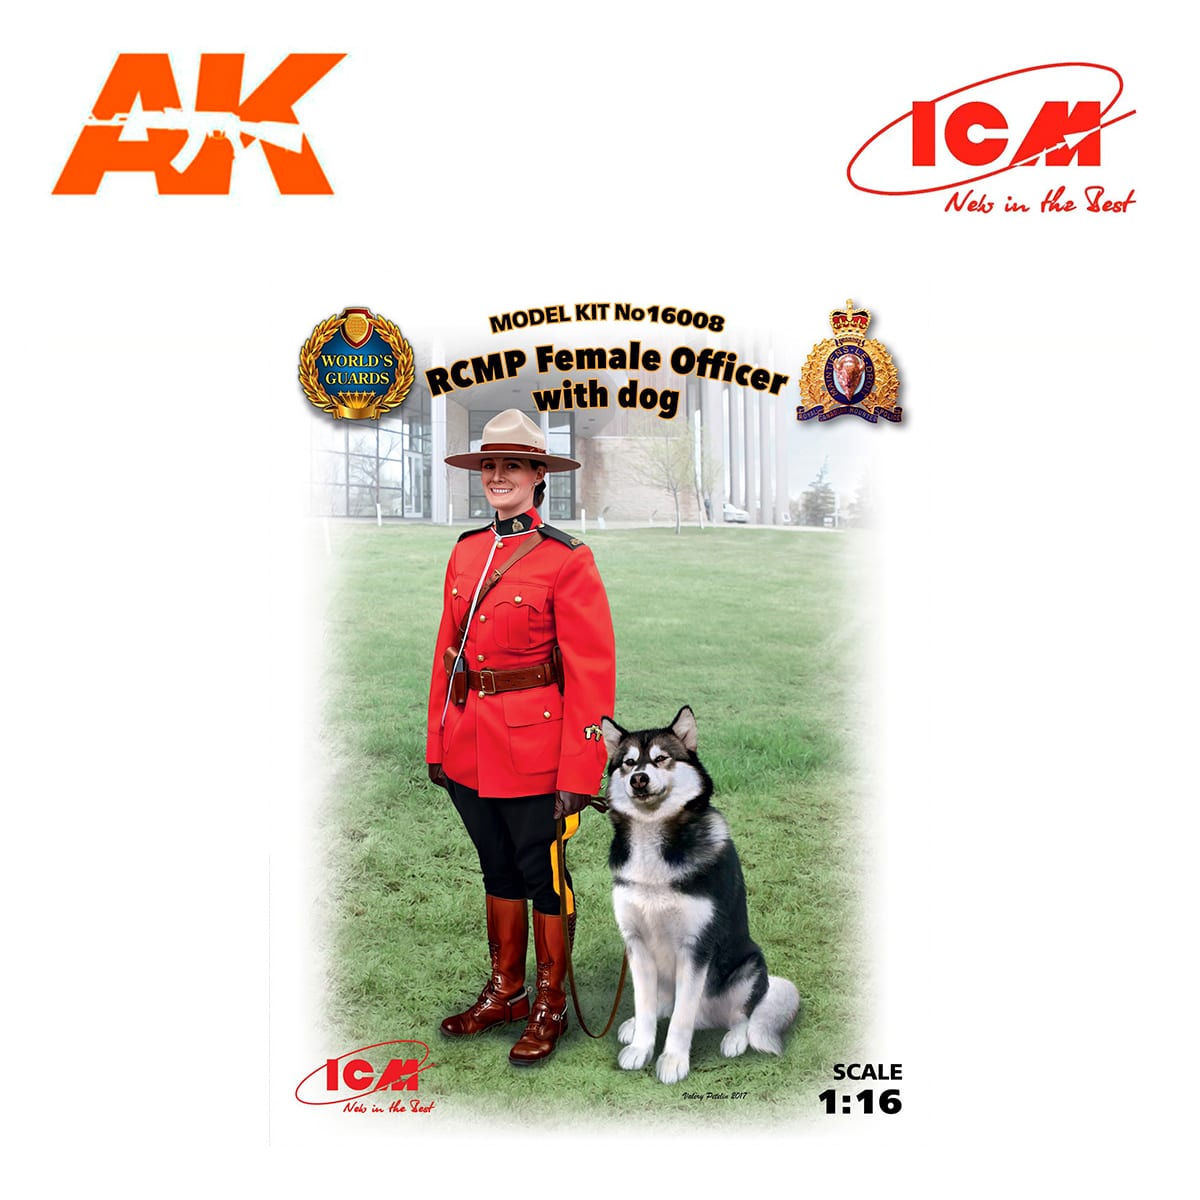 RCMP Female Officer with dog (100% new molds) 1/16